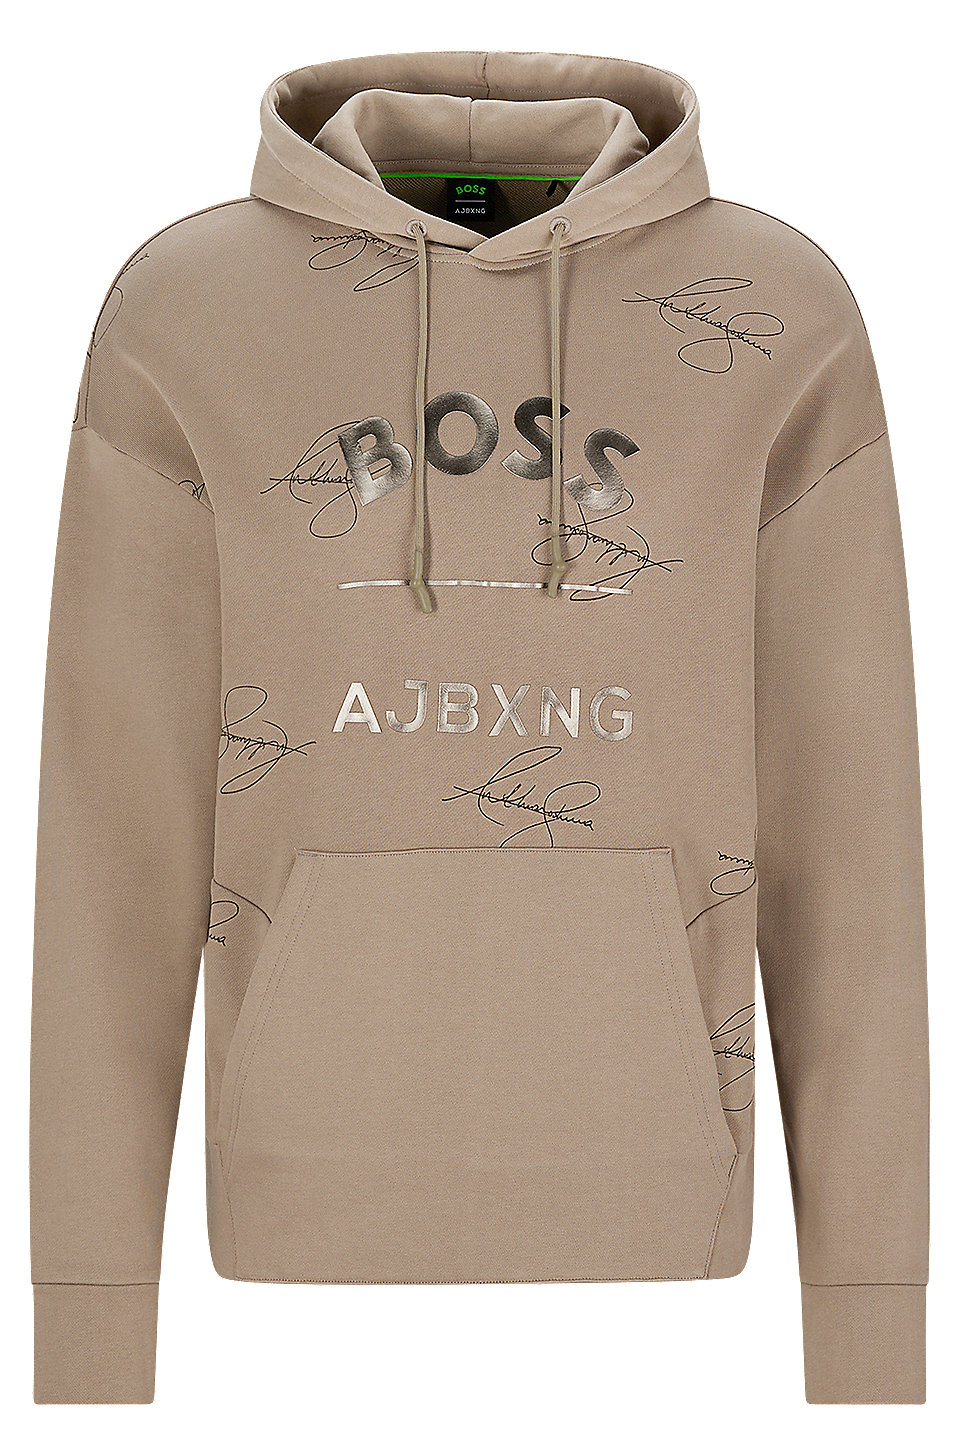 cotton BOSS branding - collaborative with BOSS AJBXNG hoodie x relaxed-fit